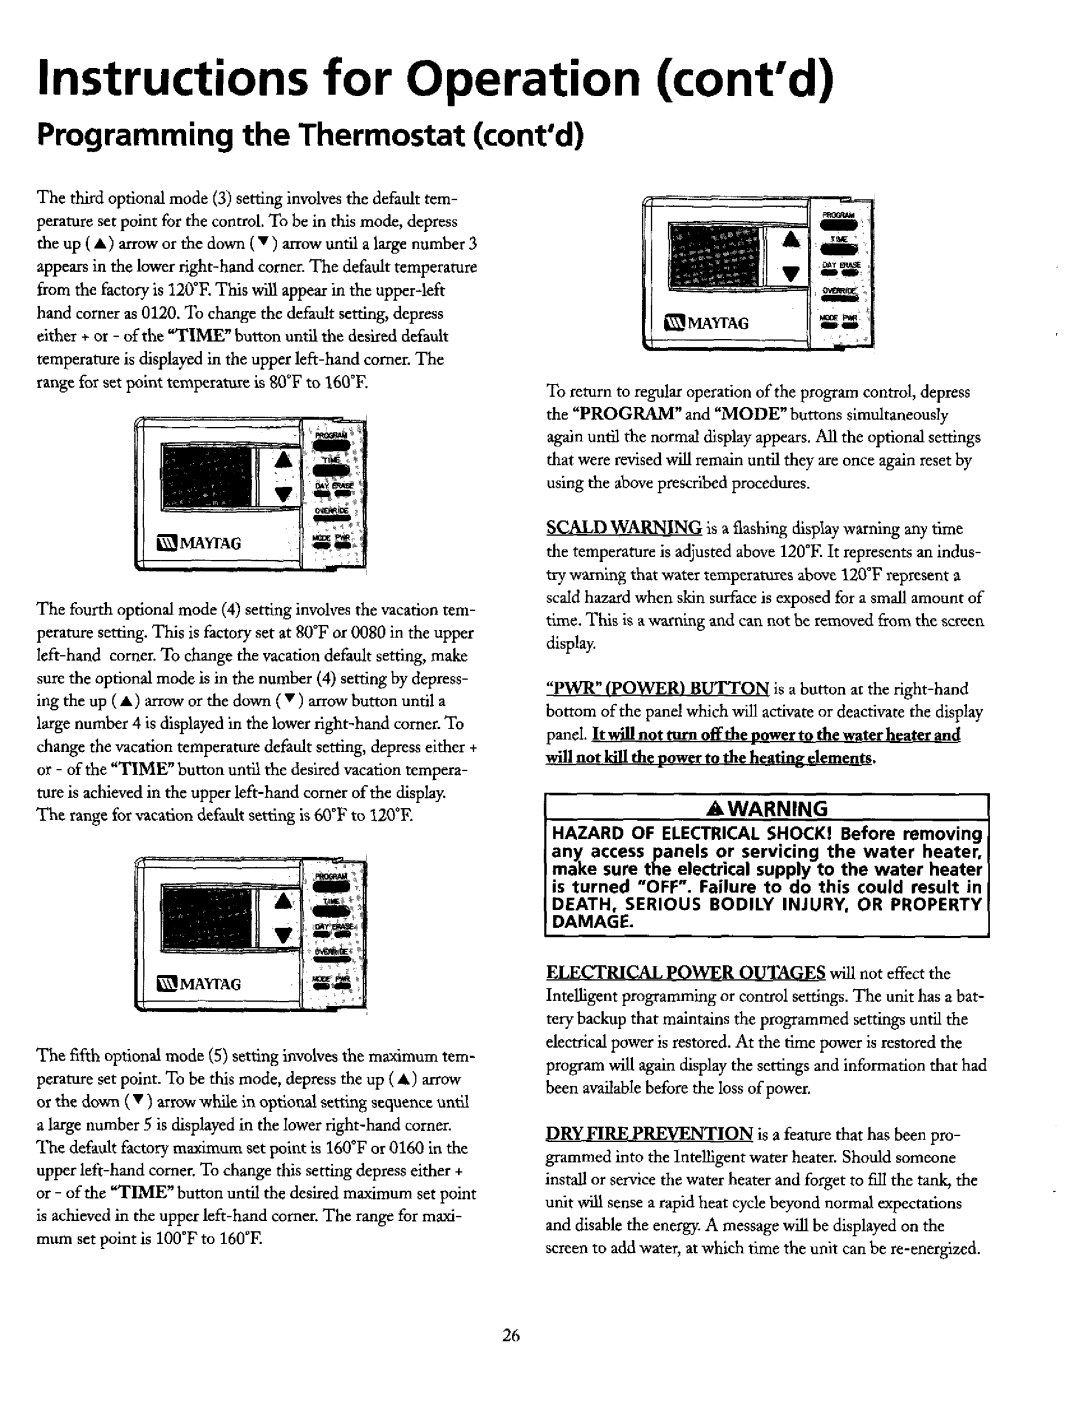 Maytag HE21250PC, HE21282PC operating instructions Programming the Thermostat contd, Instructions for Operation contd 